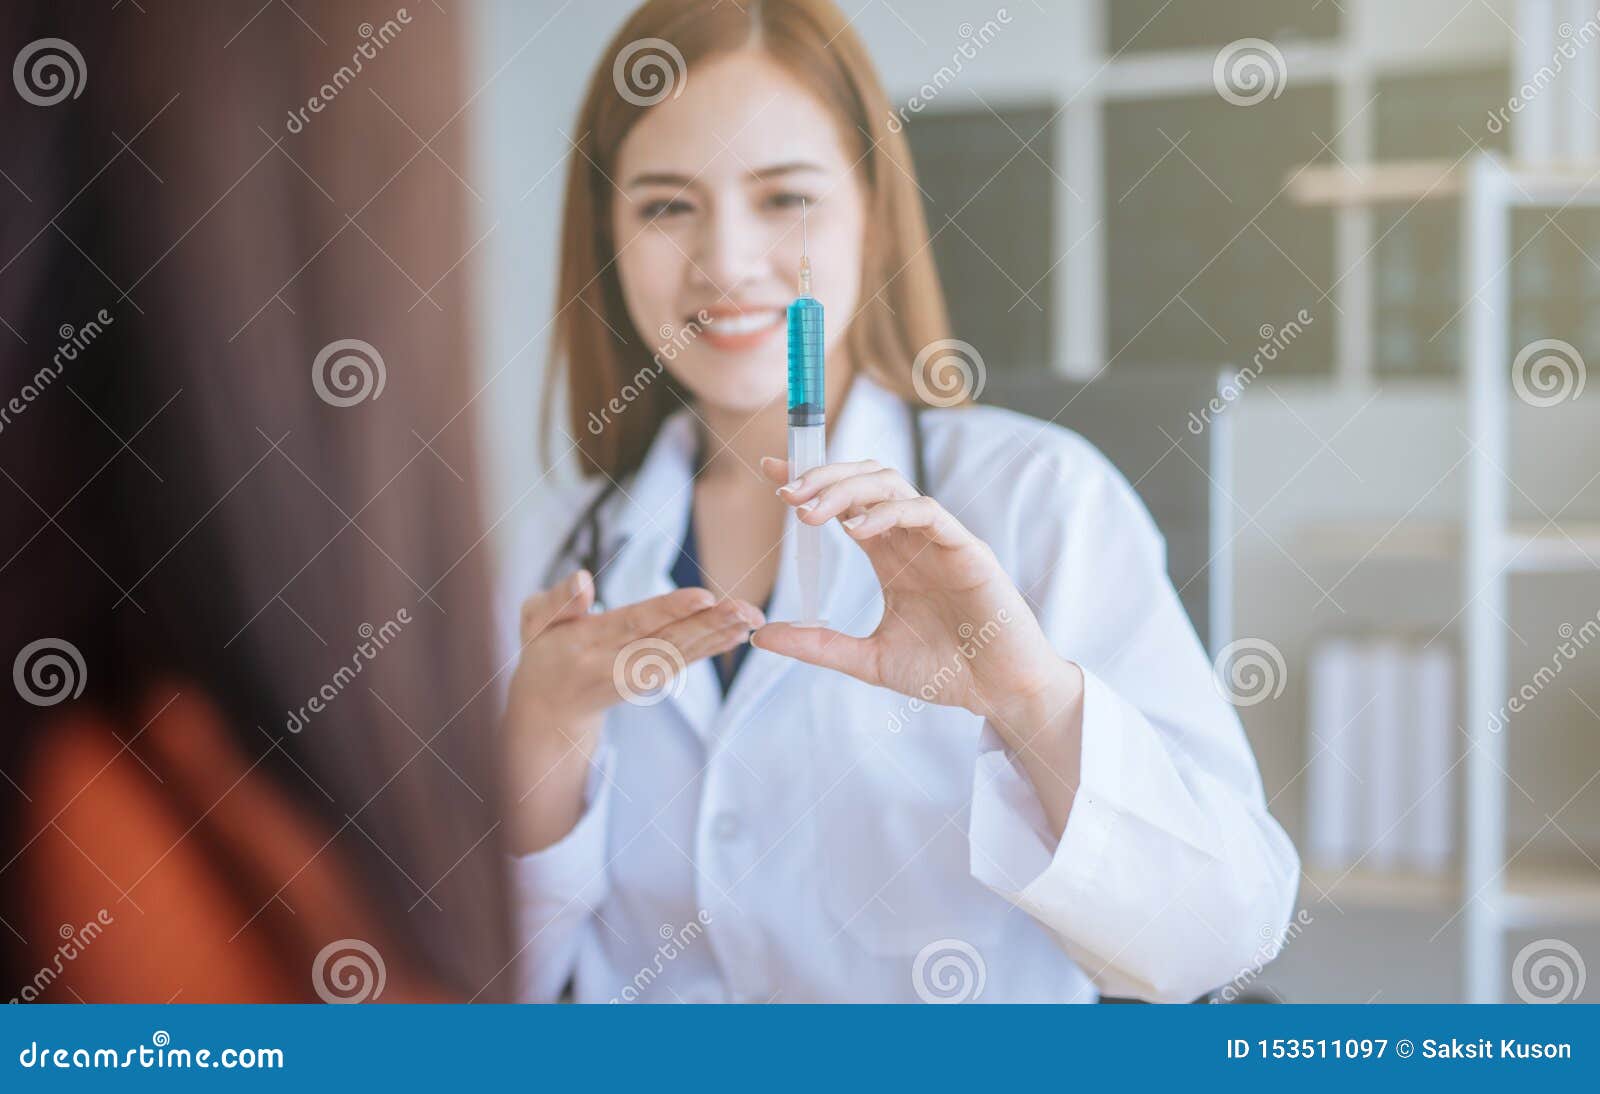 young asian doctor showing hand press syringe ready to inject shot  vaccination and medical injection image.healthcare, medical